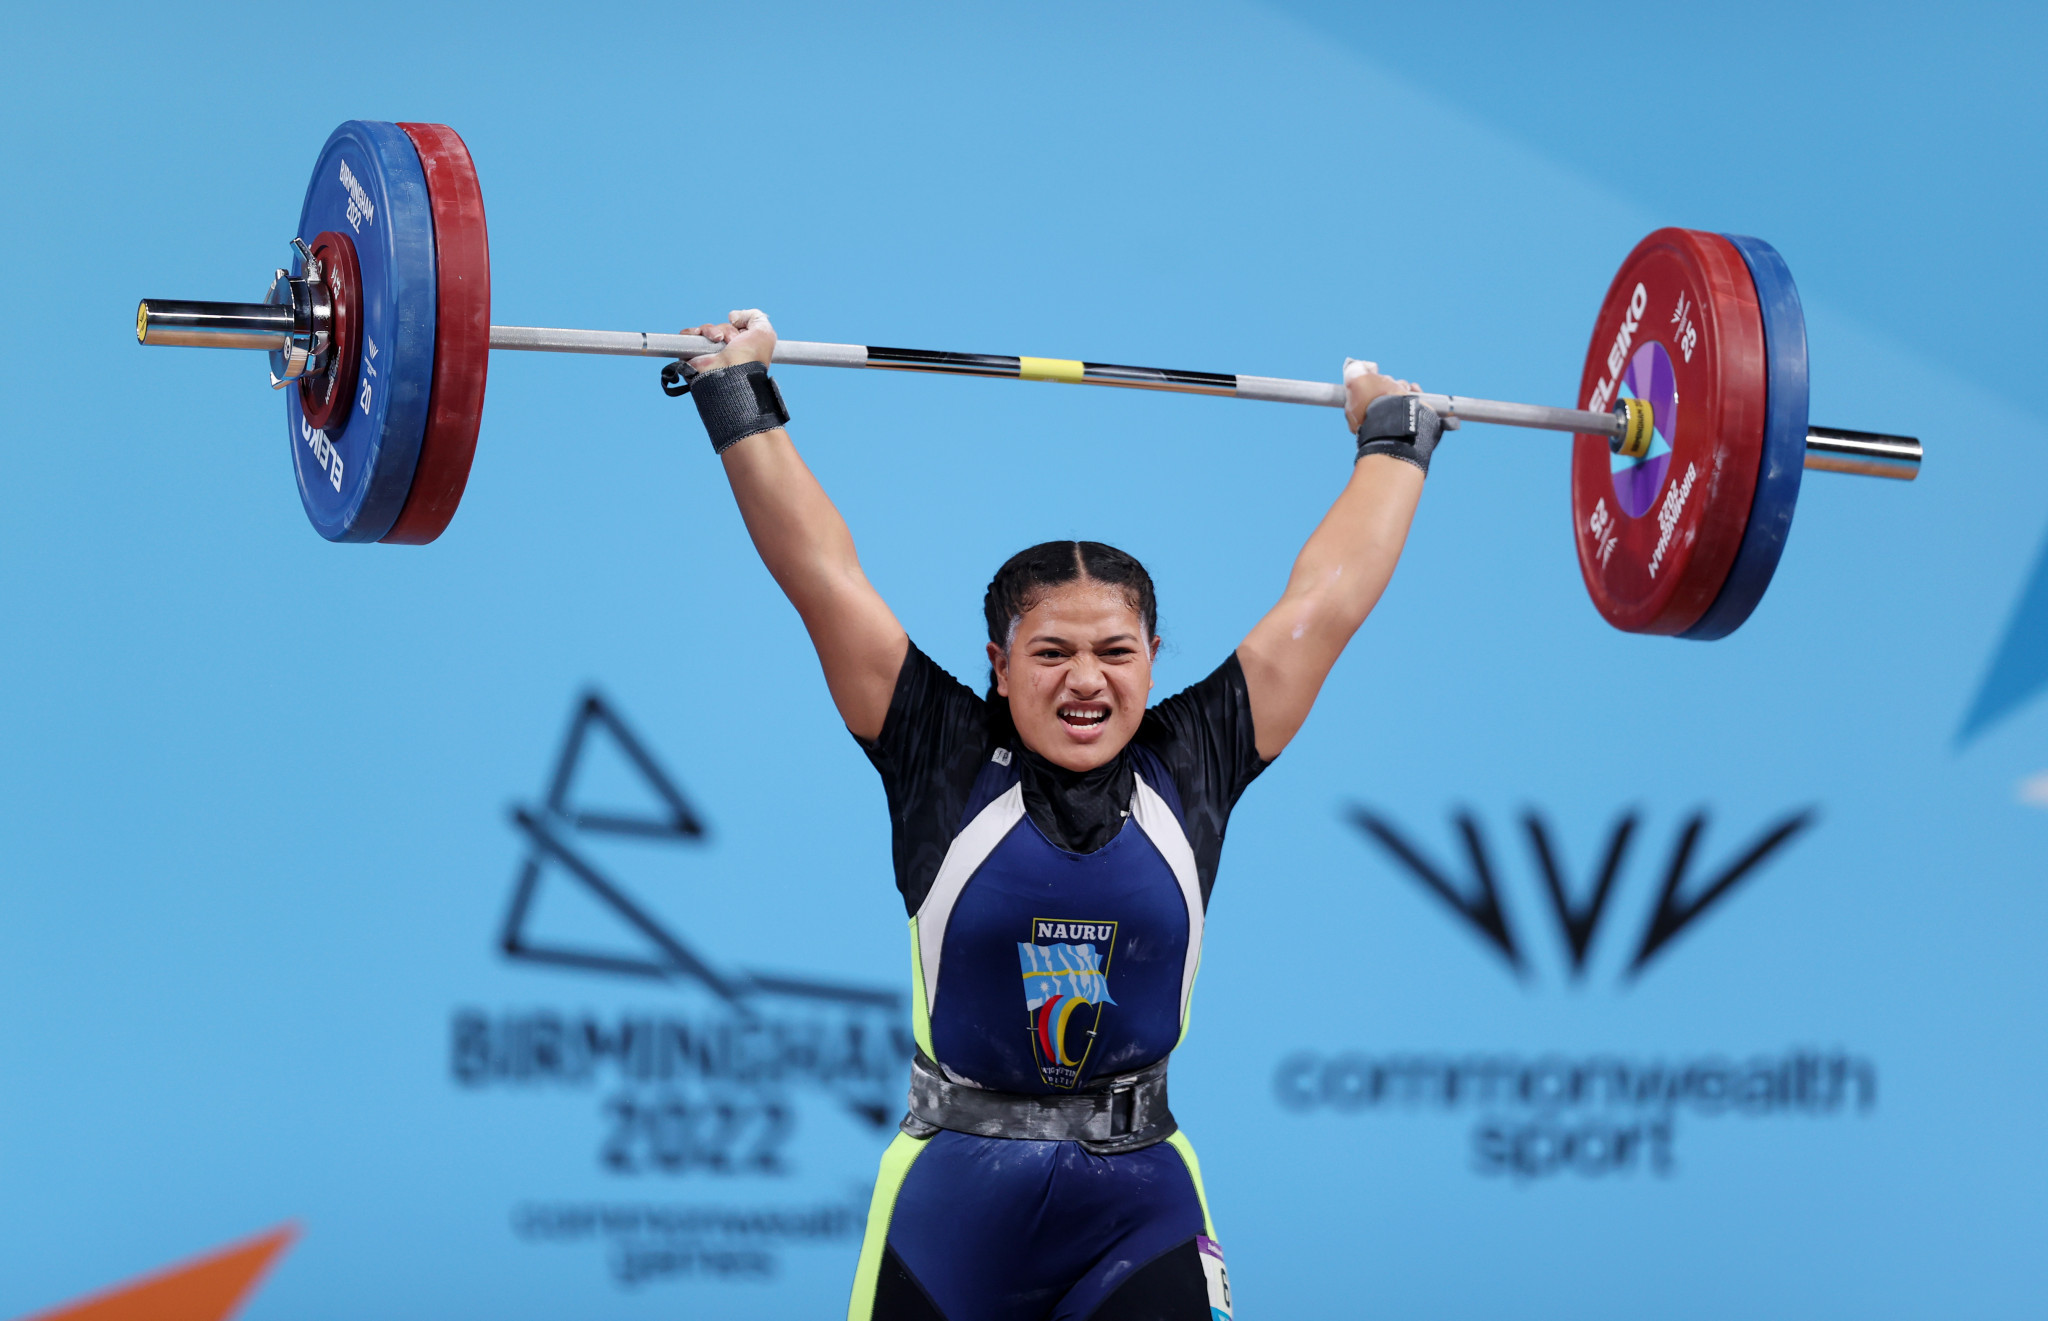 Nauru weightlifter dedicates medal to ex-champion mother of five killed by COVID